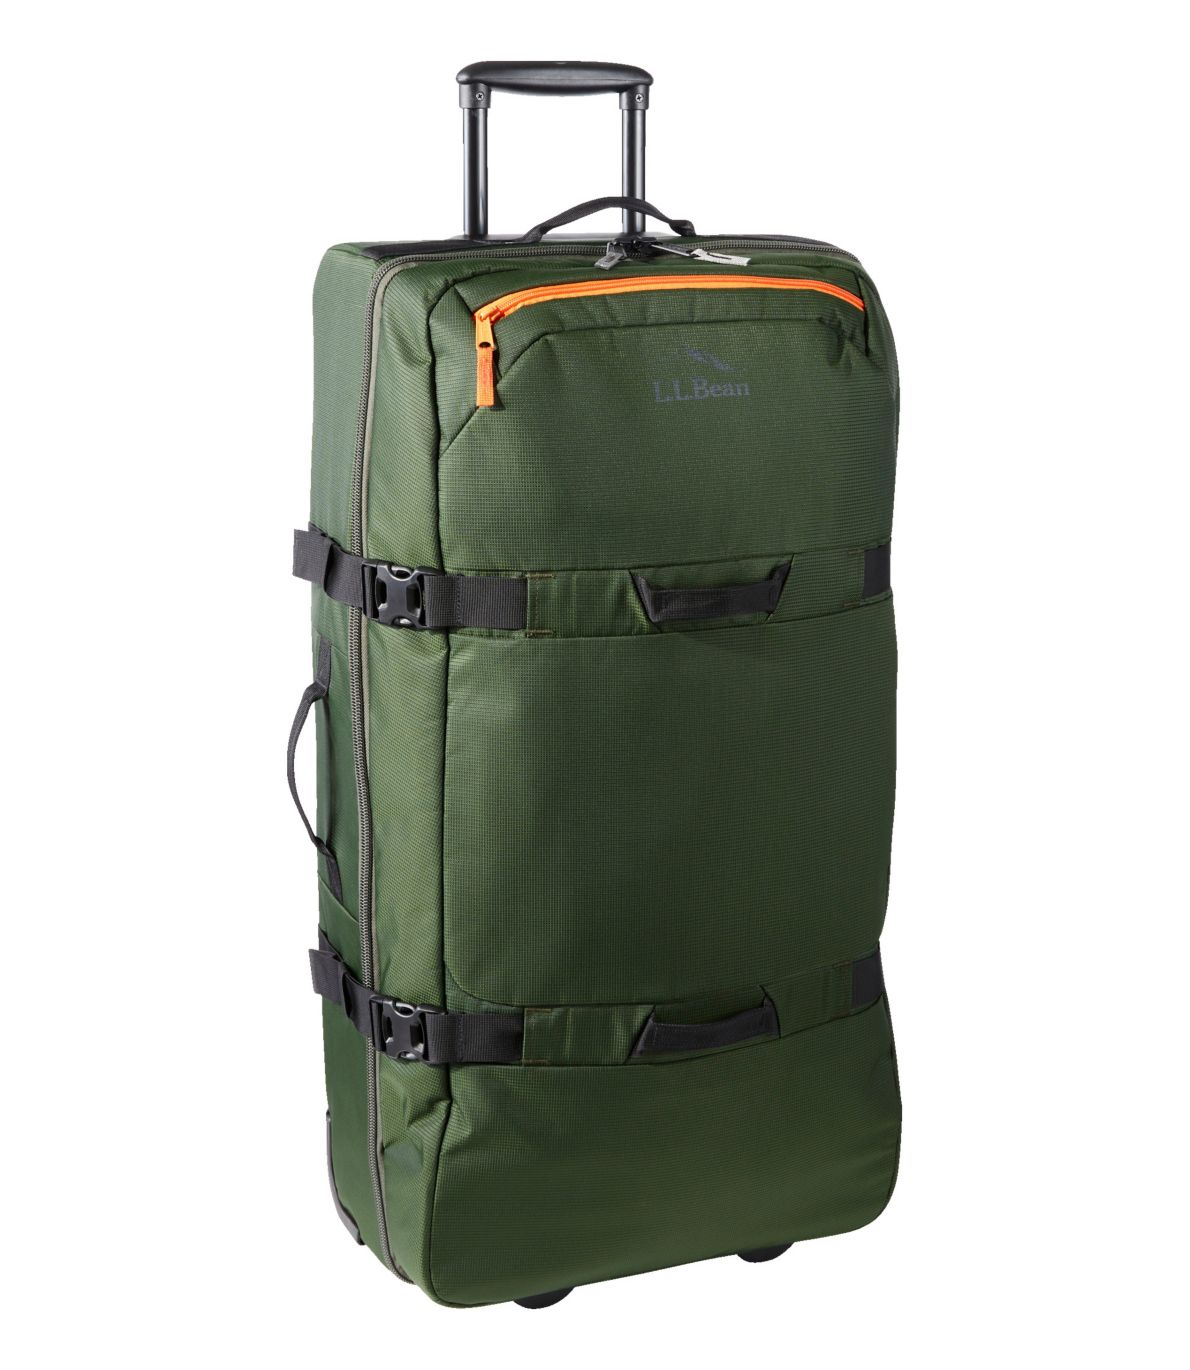 Approach Rolling Gear Bag, Extra-Large